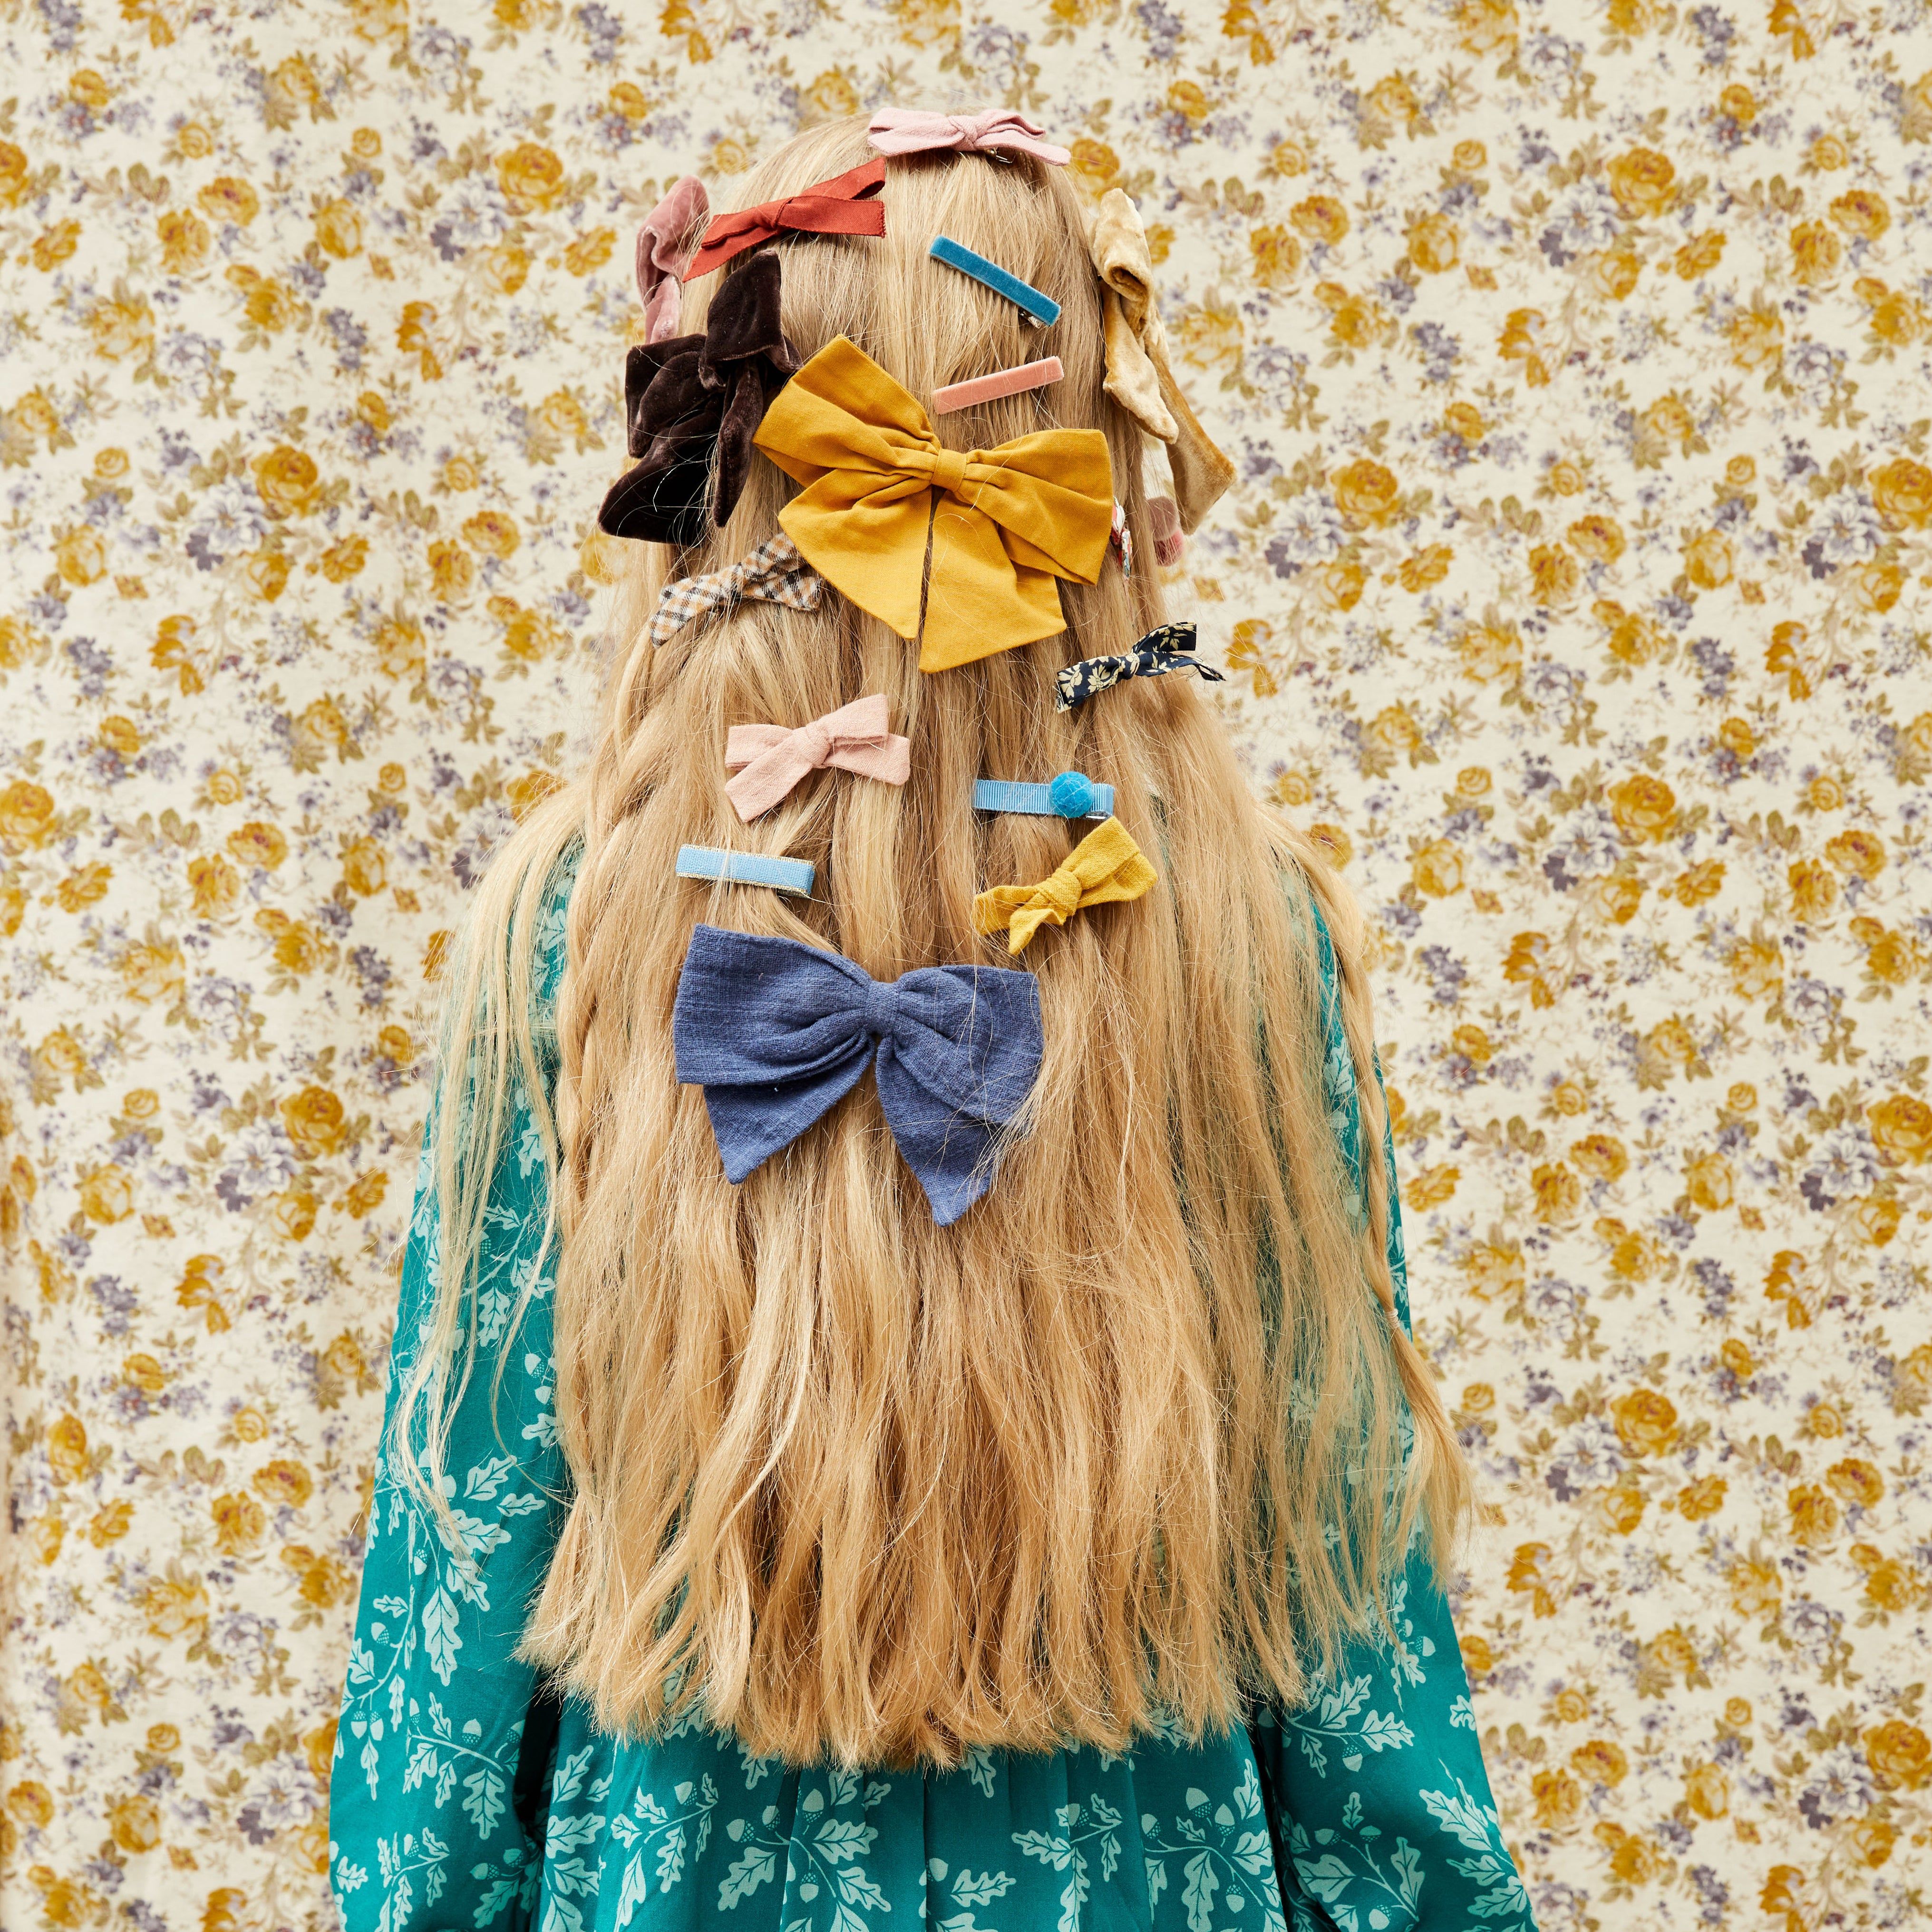 girl with long hair and many hair bows in her hair in front of a patterned backdrop